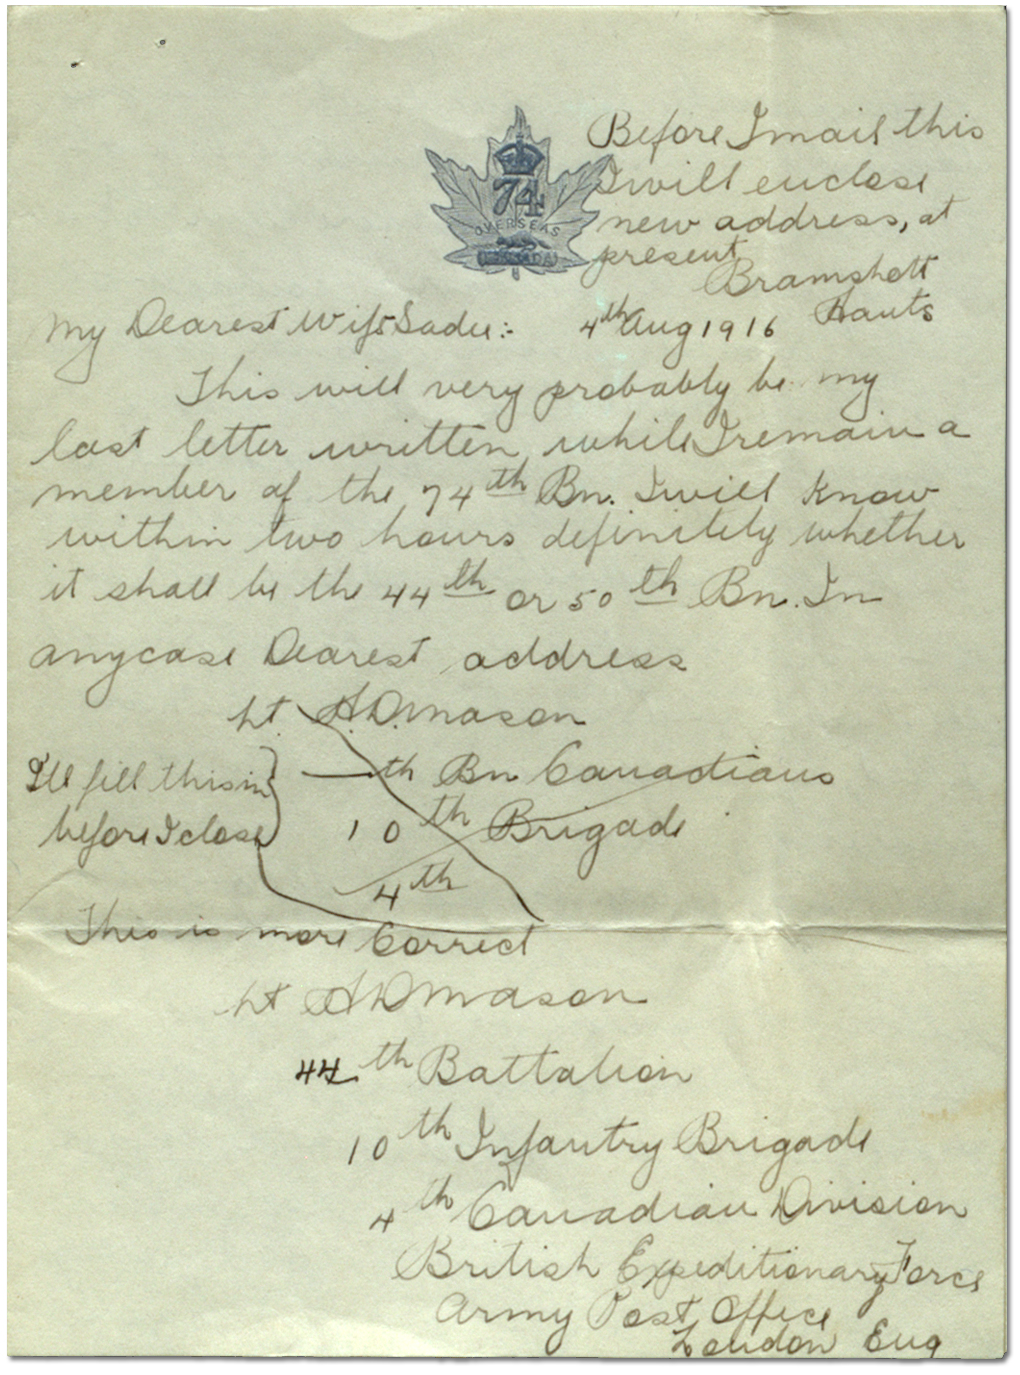 Letter from Harry Mason to Sadie Arbuckle, August 4, 1916